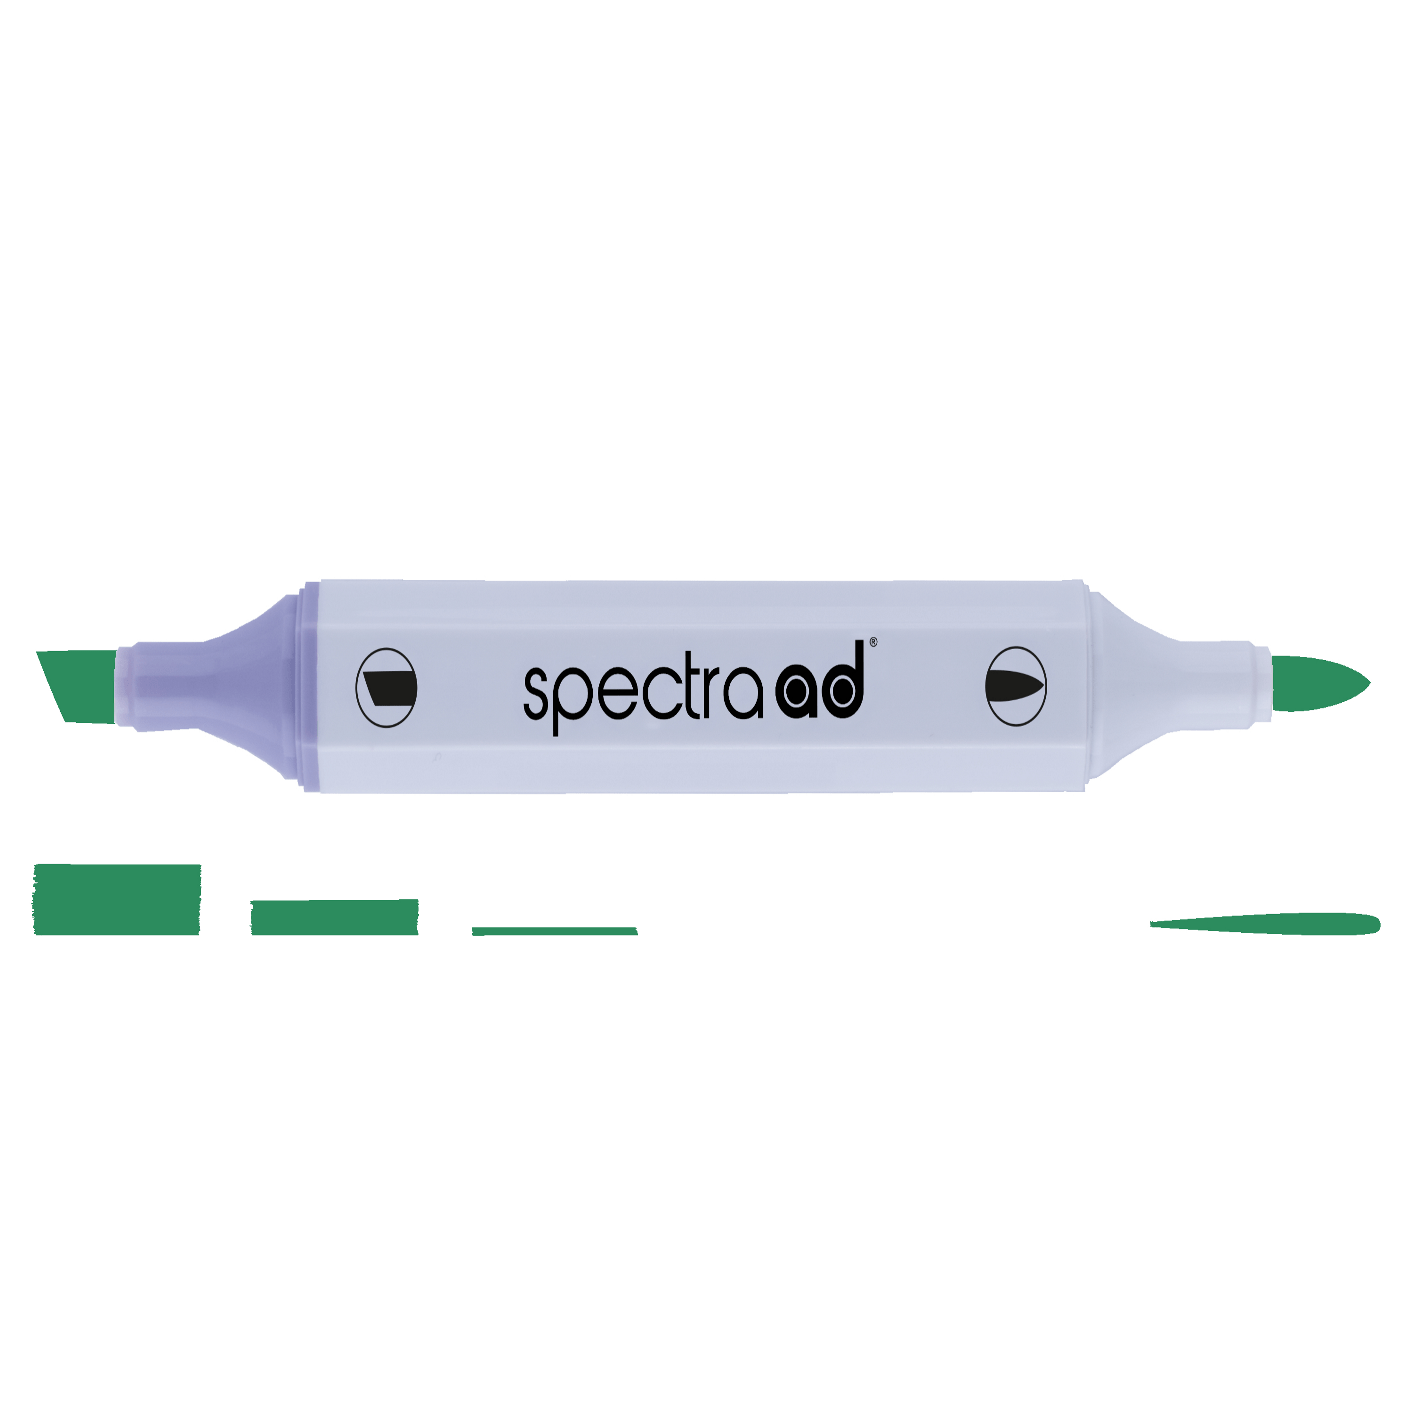 AD Marker Spectra Pickle Green